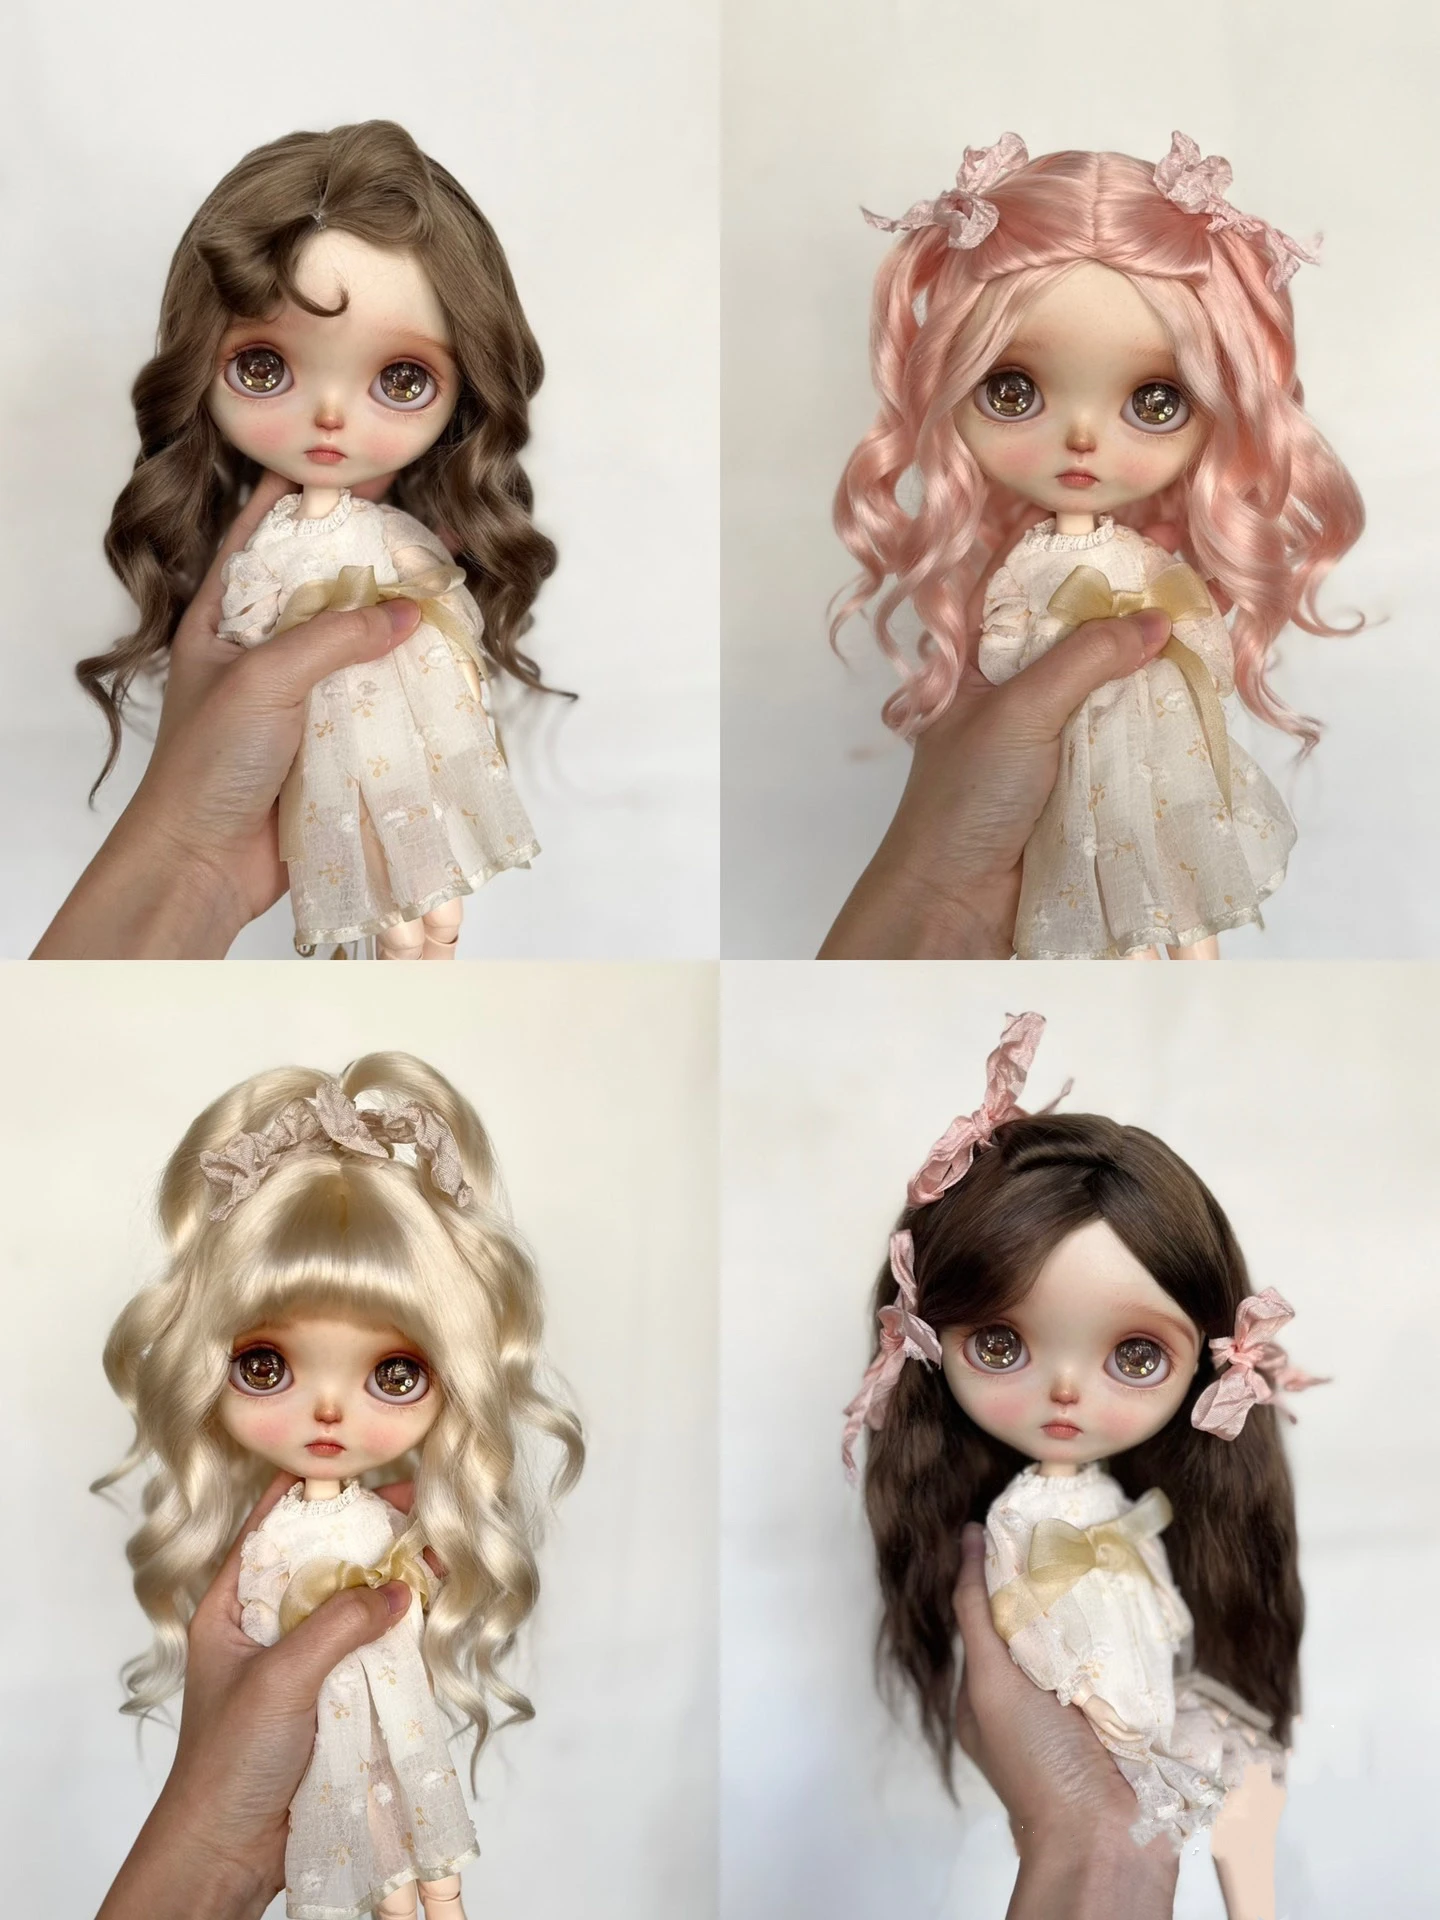 

Doll Wigs for Blythe Qbaby Mohairsculpt Microvolumes curls 9-10 inch head circumstance Free Shipping